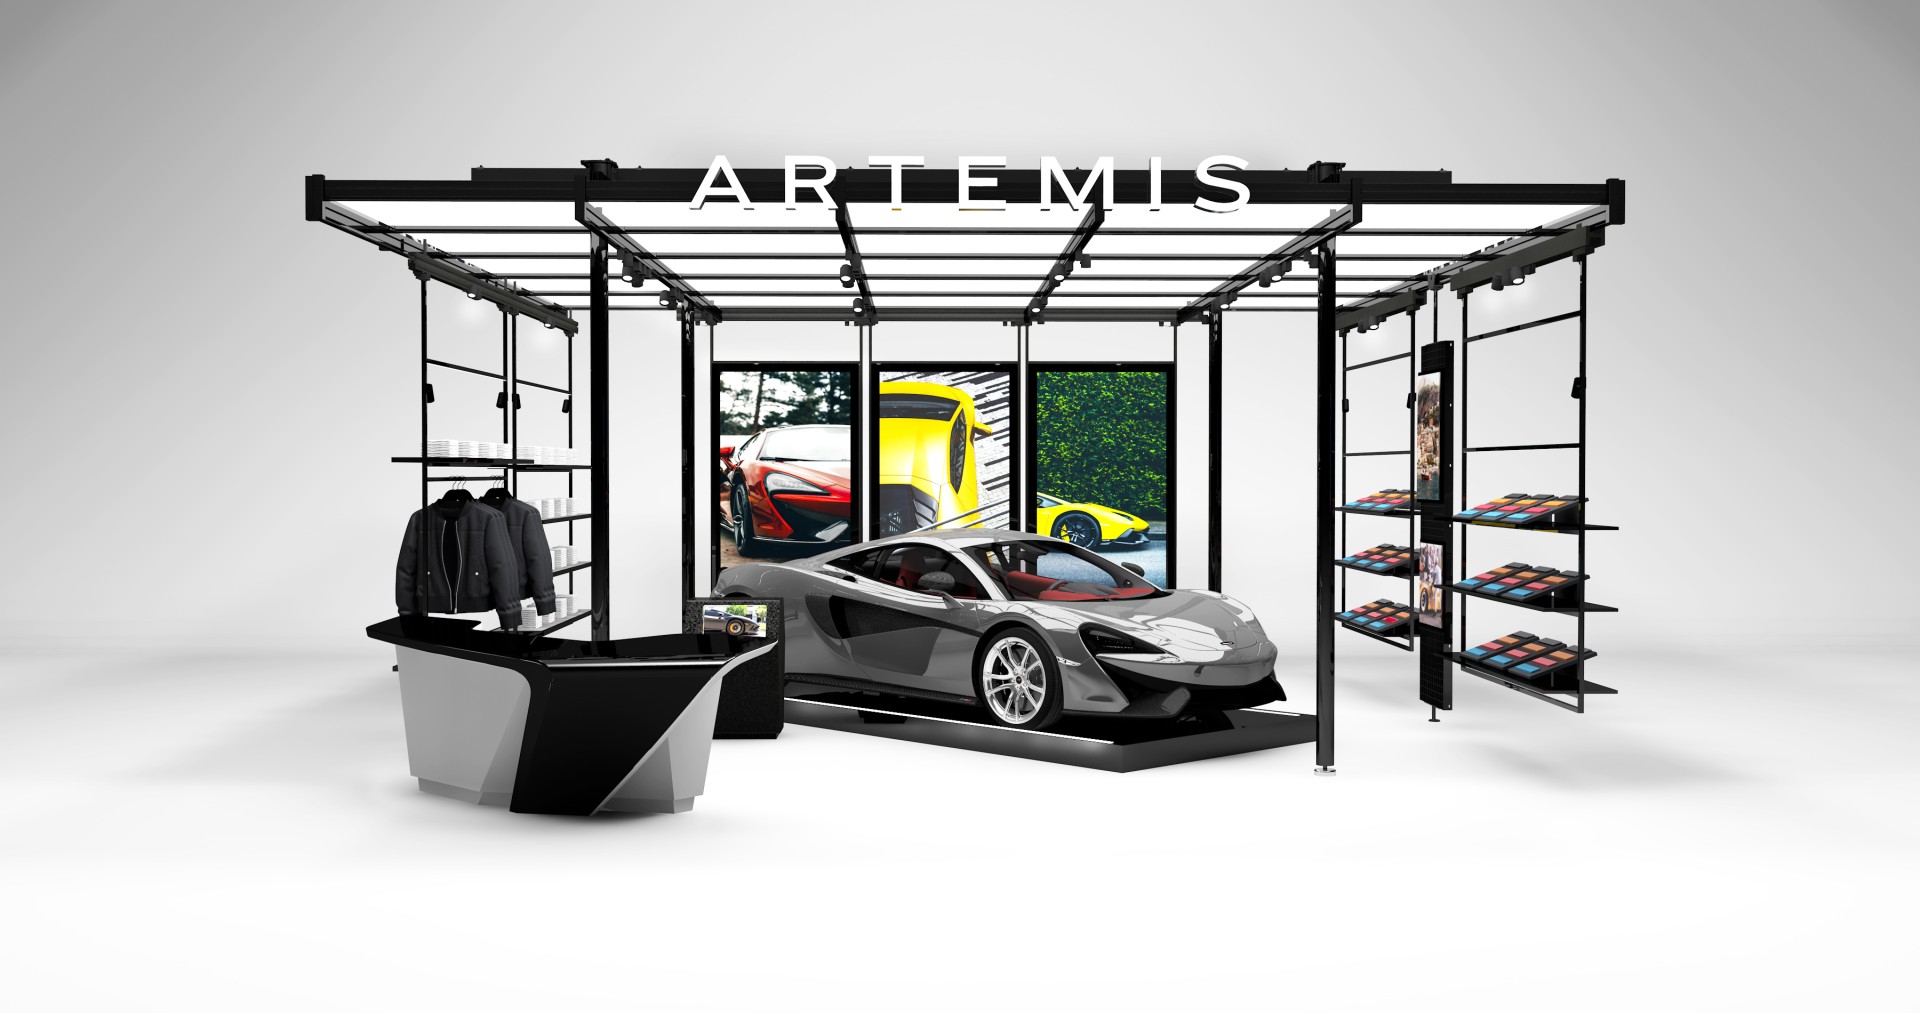 3D model of a business concept in the automotive industry.